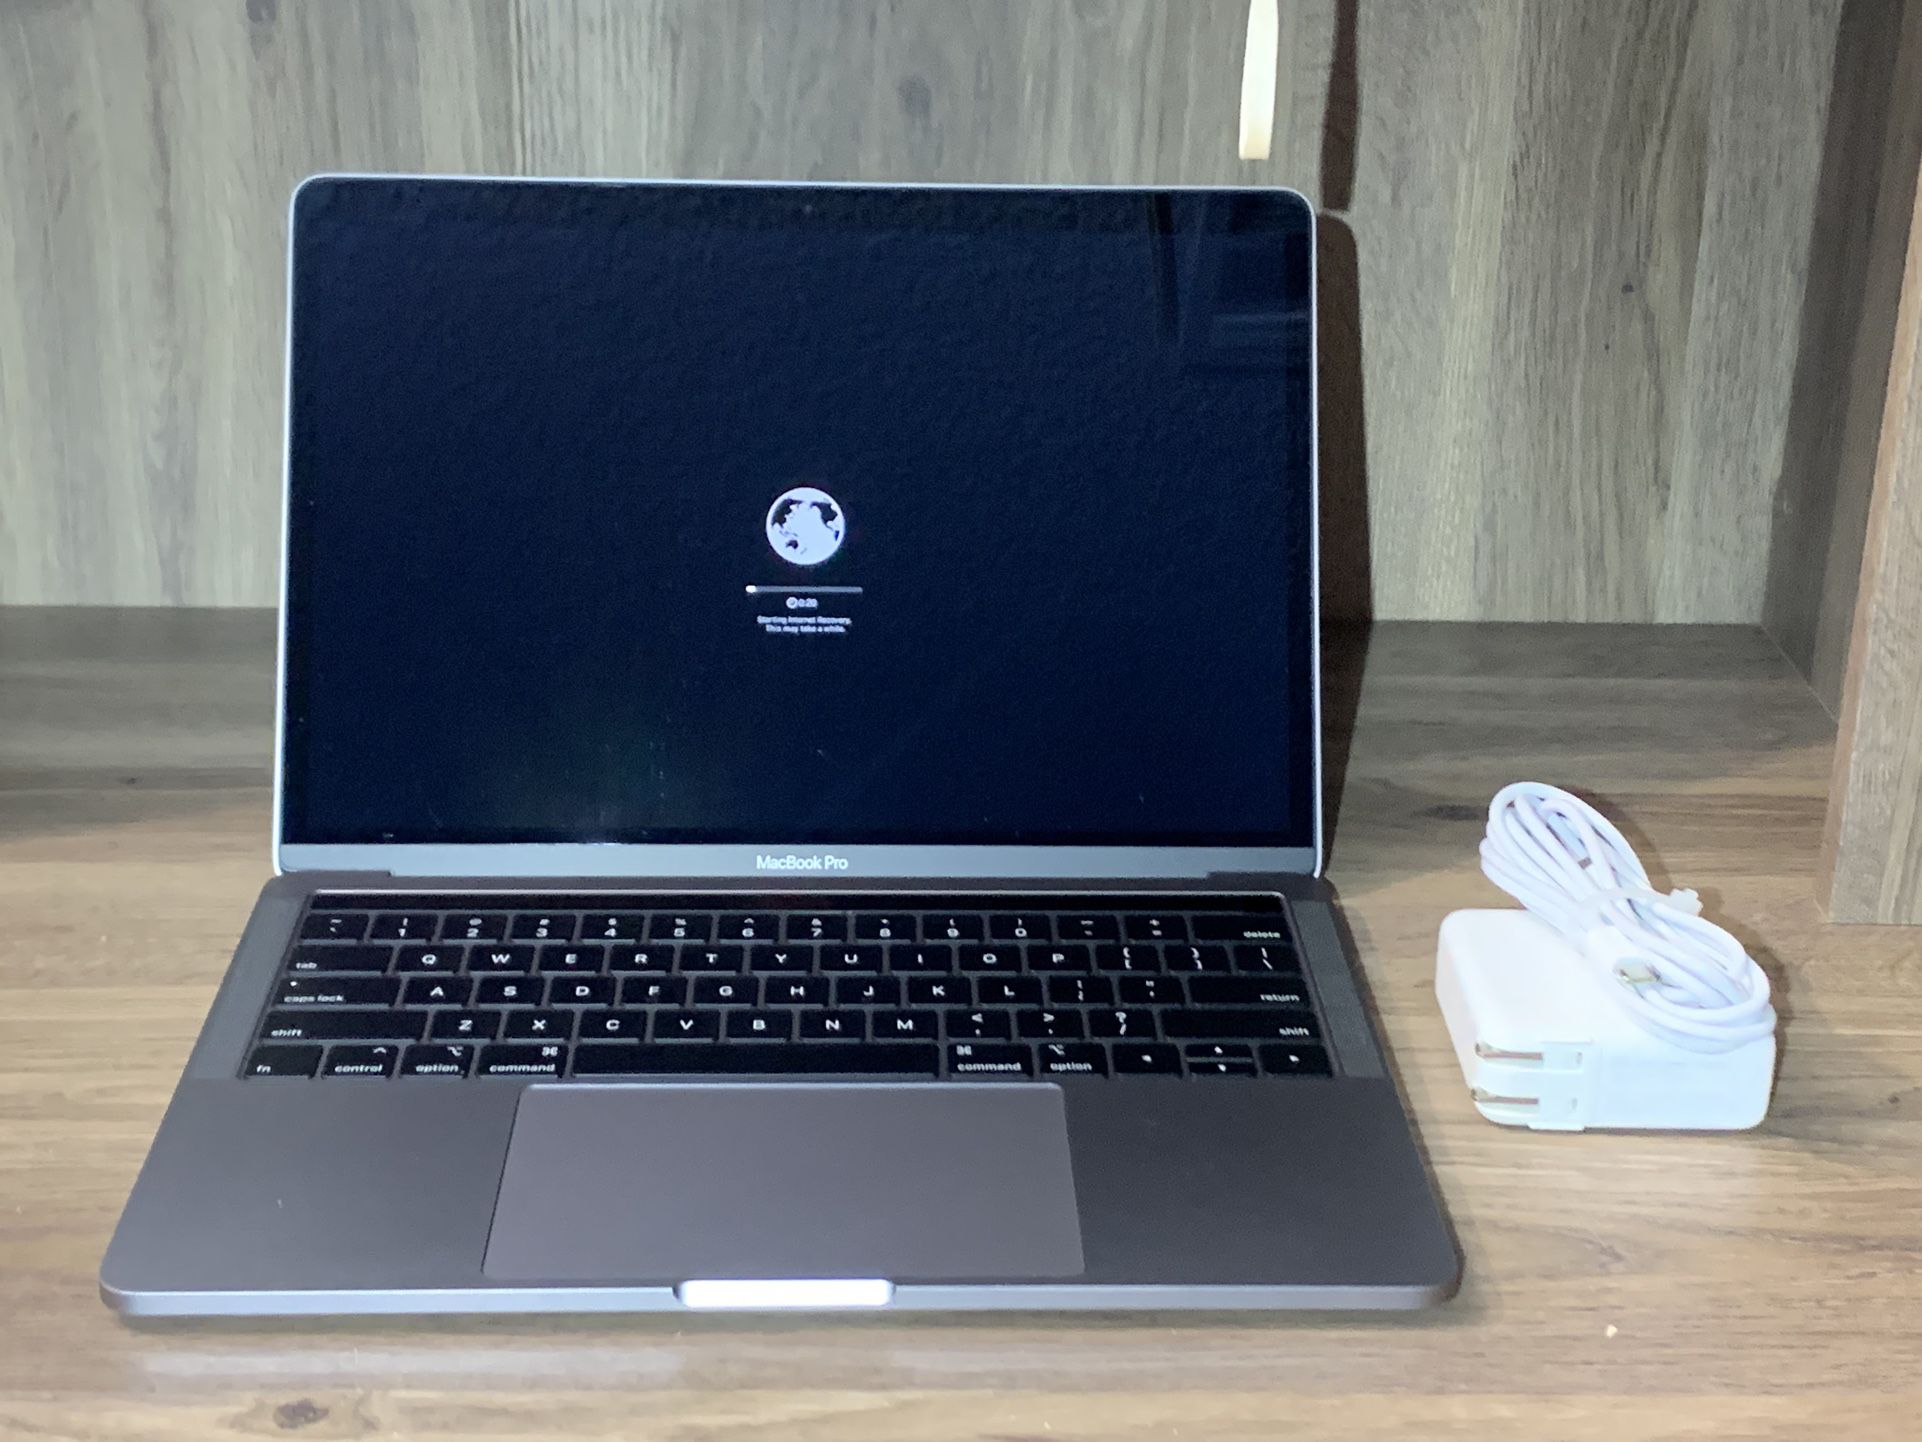 MACBOOK PRO (13-INCH, 2019, 2 TBT3) SPACE GRAY [A2159] [MACBOOKPRO15,4] Model Year:2019